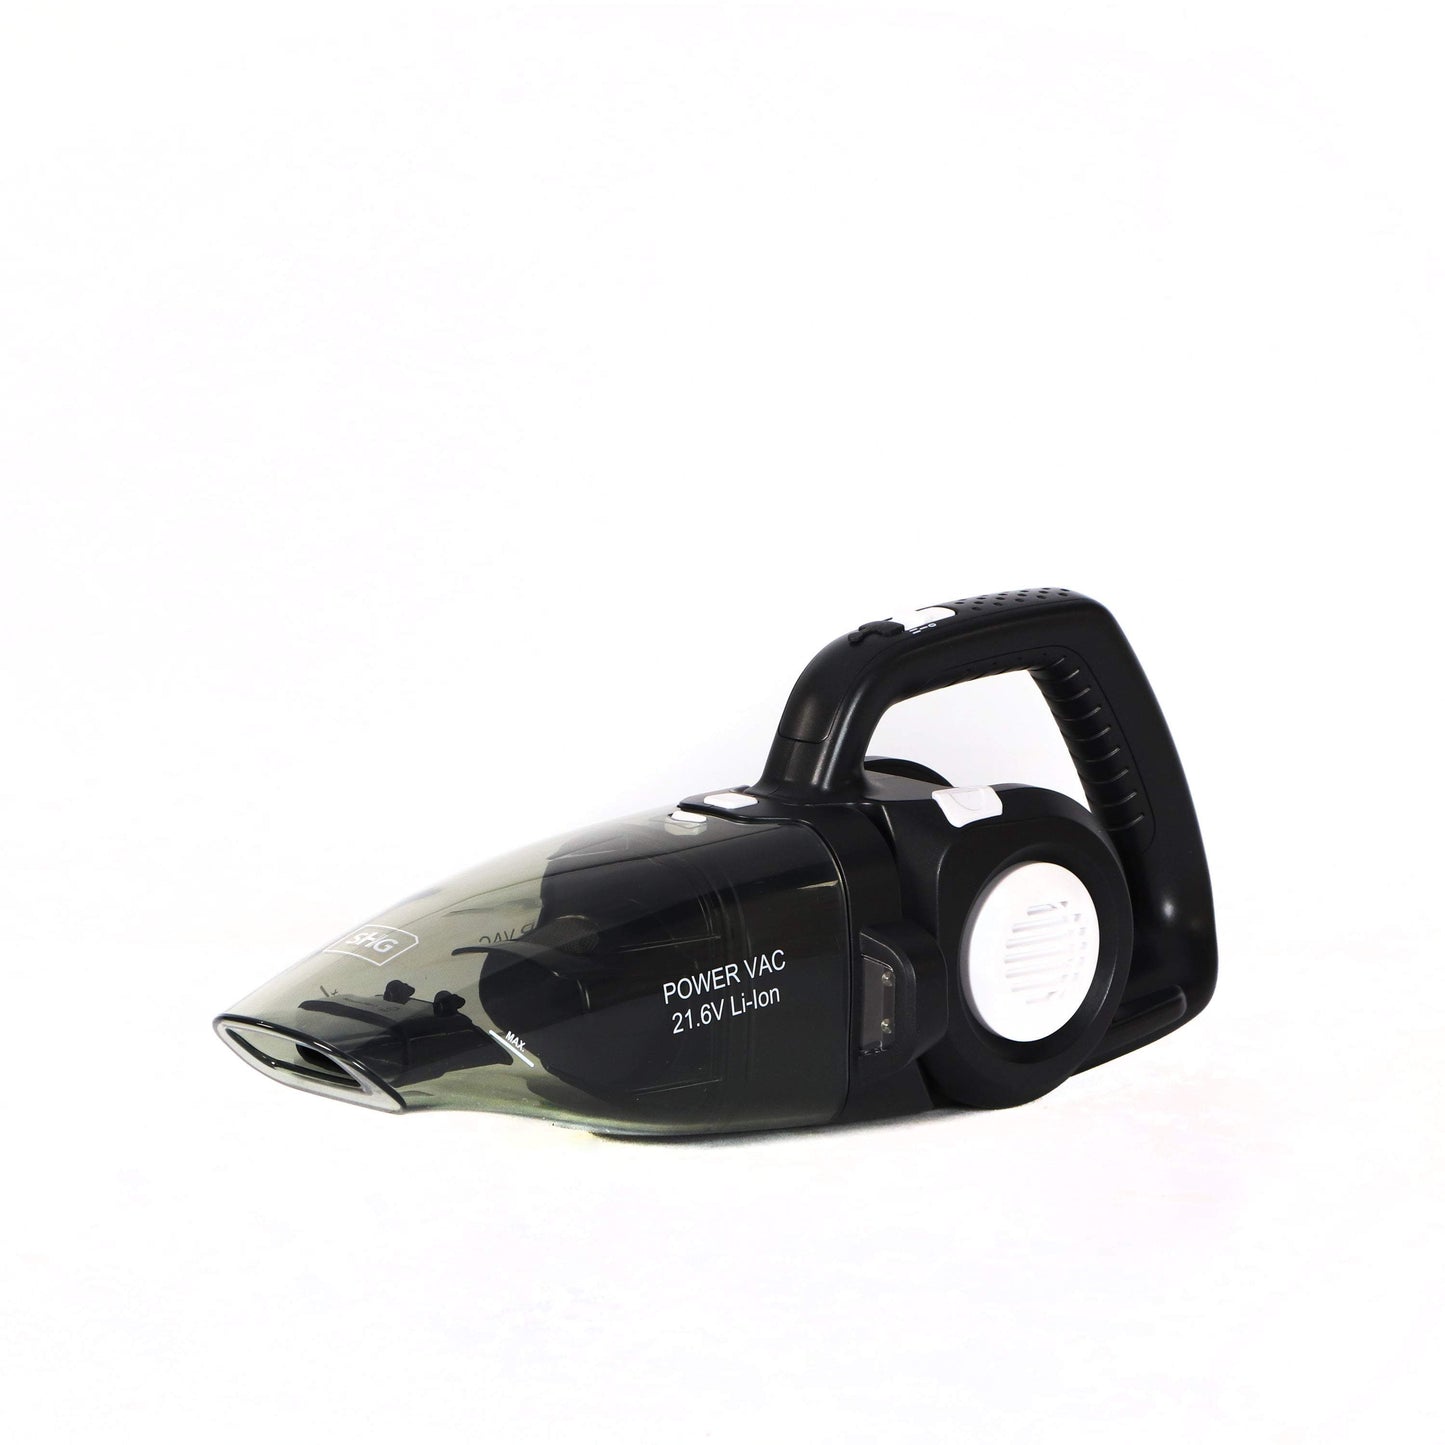 SHG professional cordless hand vacuum cleaner - VC 920-Royal Brands Co-